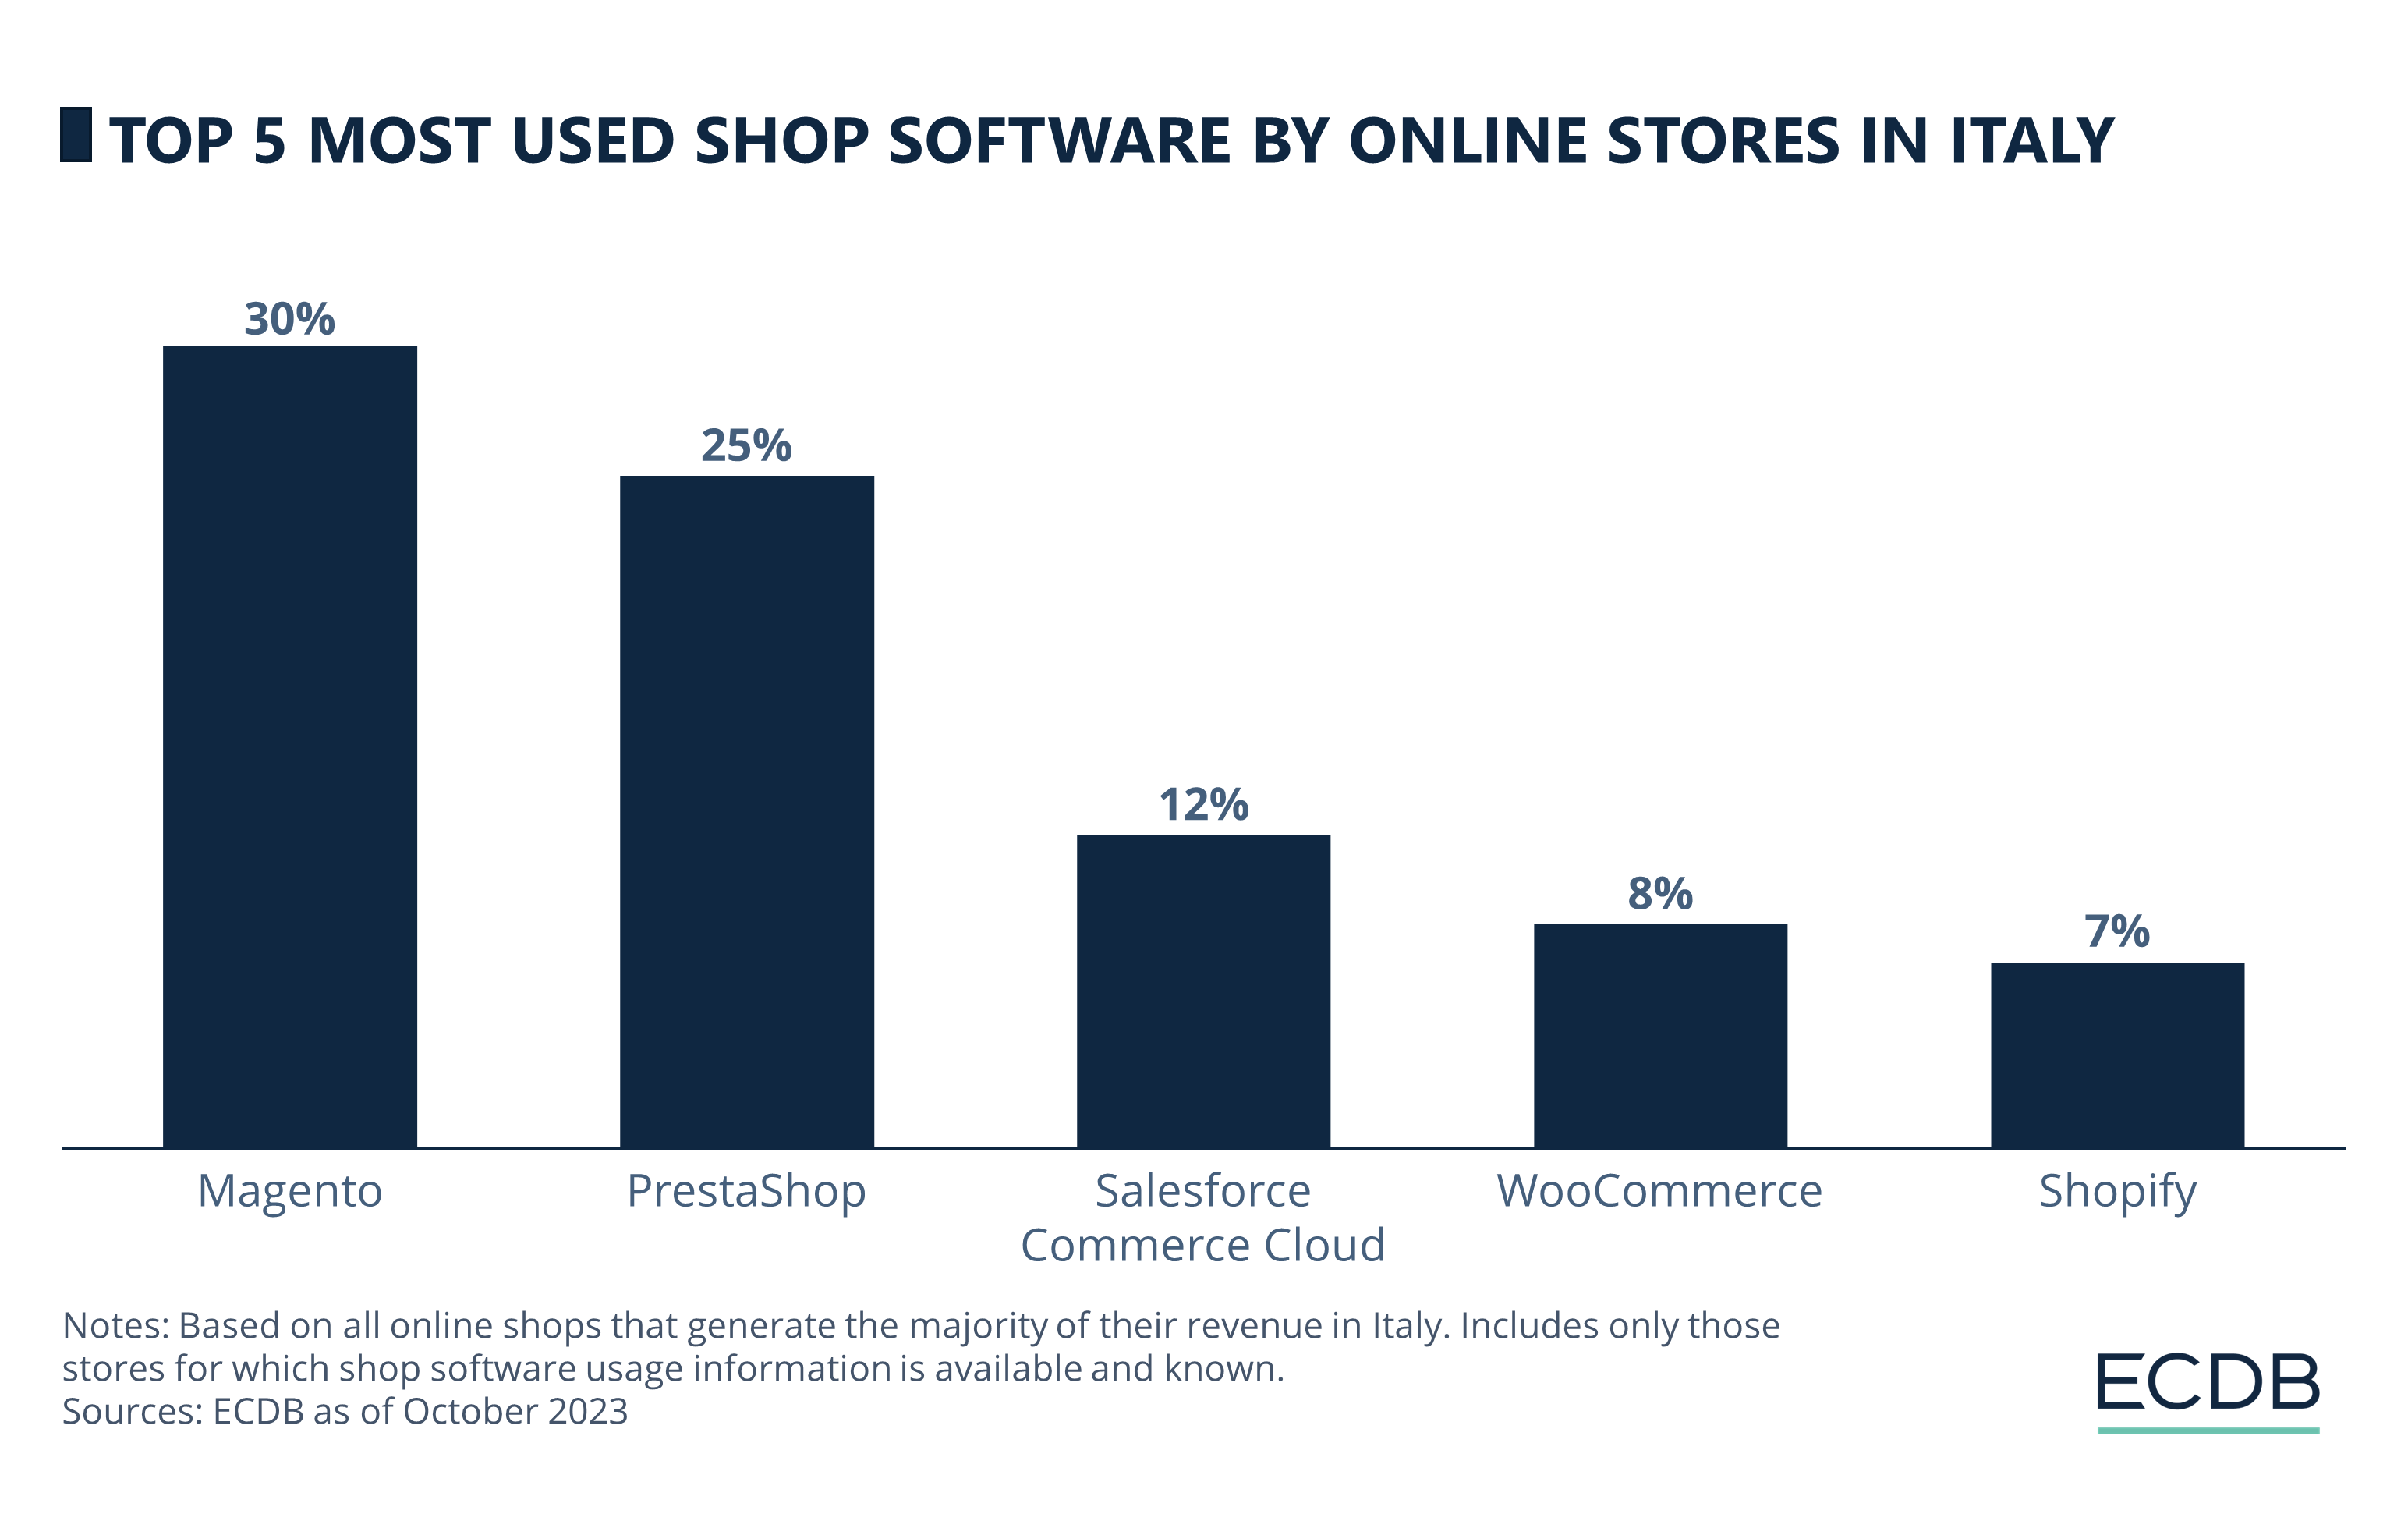 Top 5 Most Used Shop Software by Online Stores in Italy